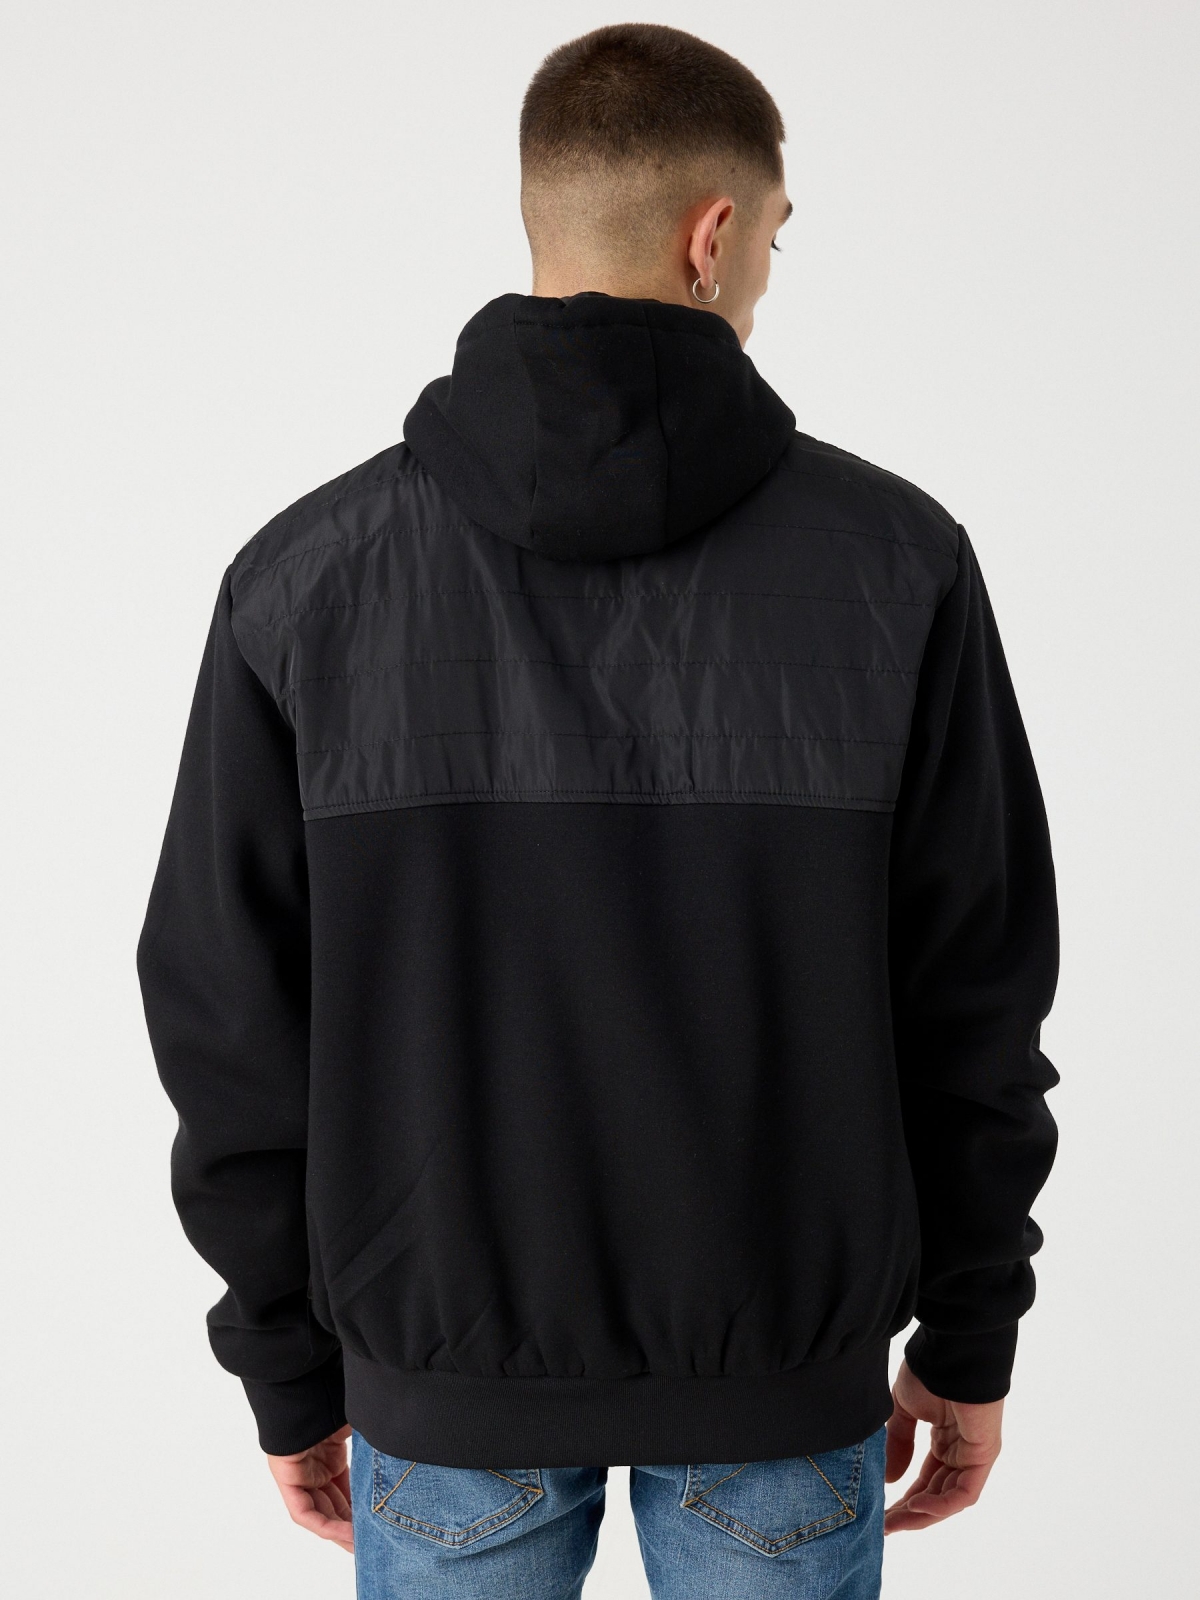 Combined hooded jacket black middle back view